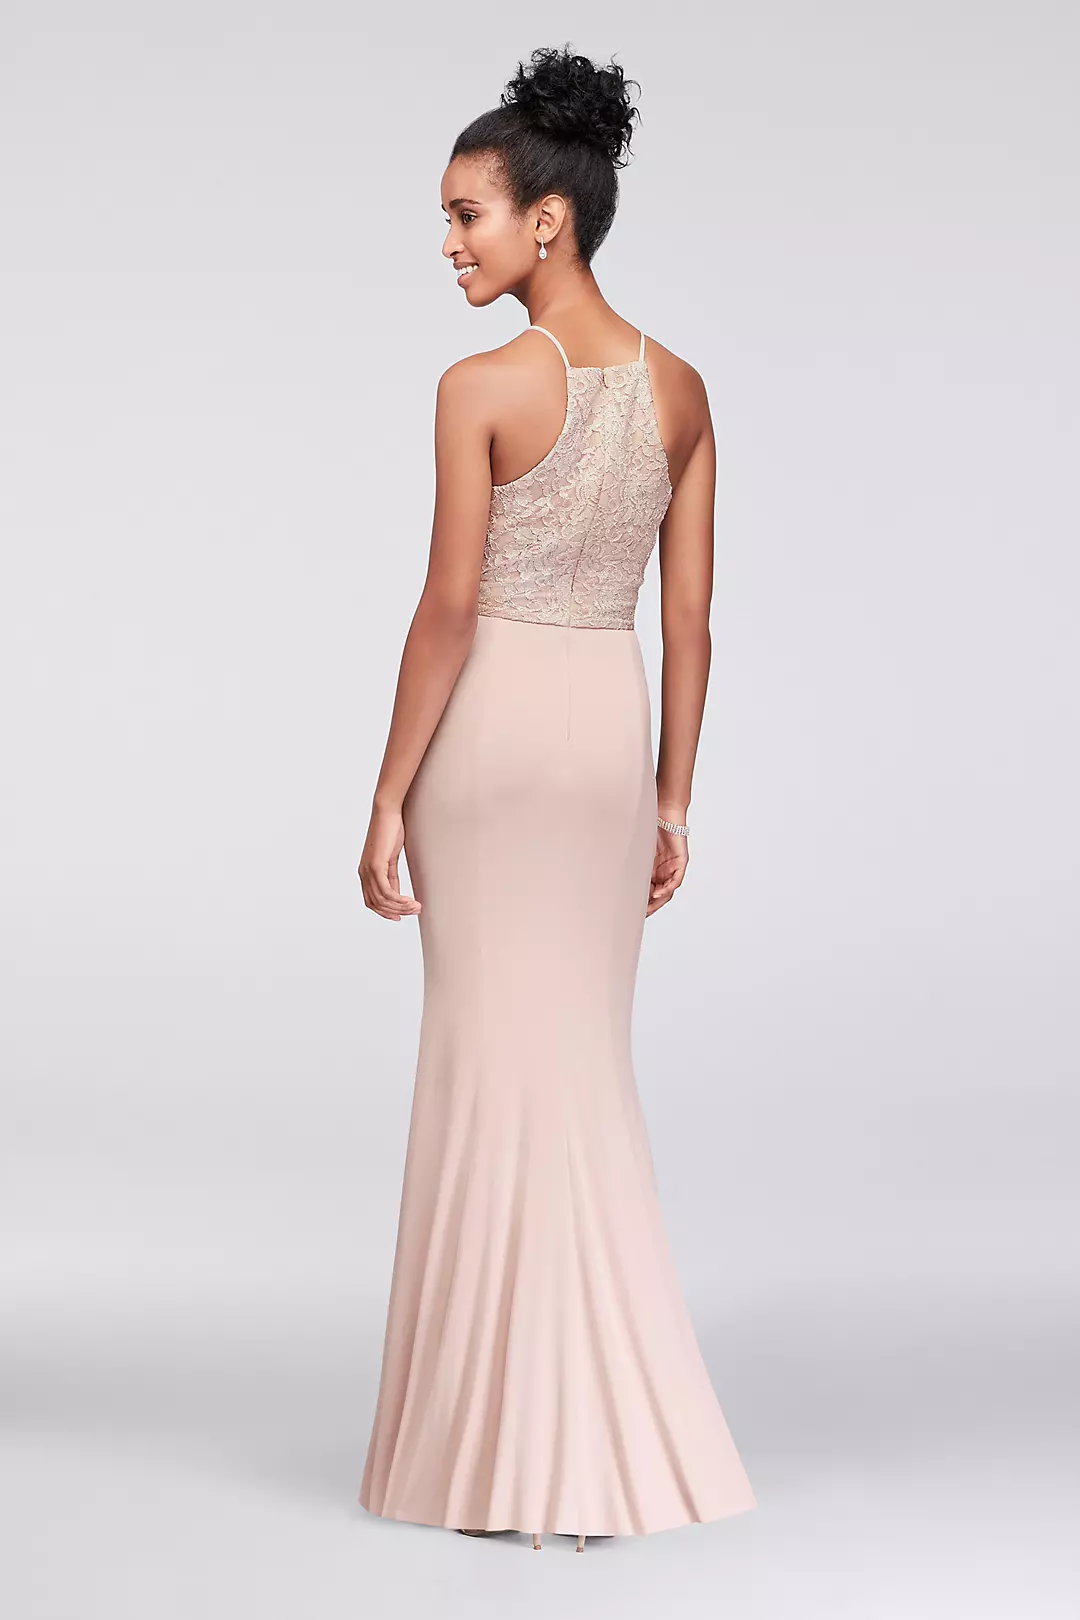 Beaded Waist Lace and Jersey Halter Sheath Gown Image 2